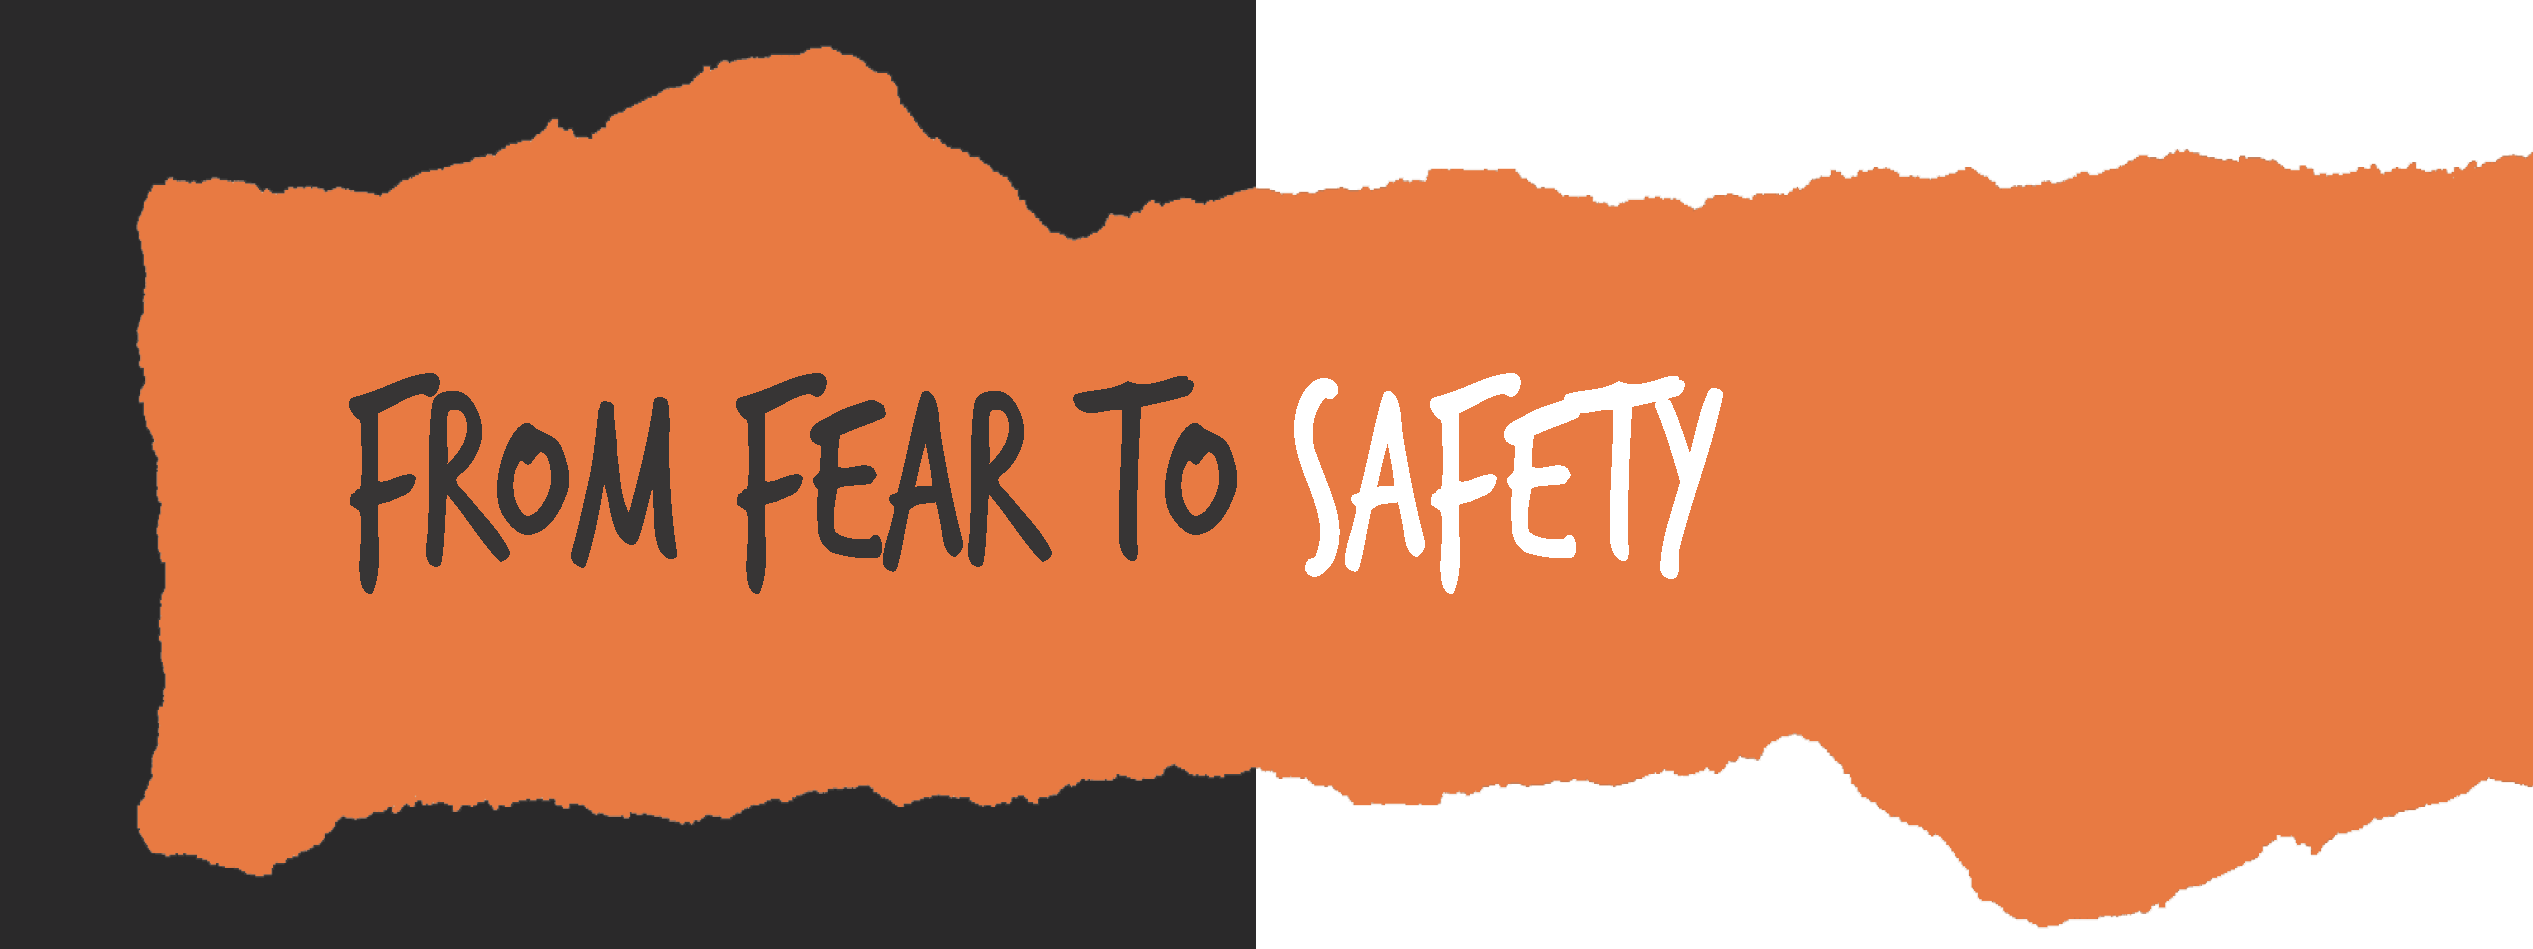 heading: From fear to safety